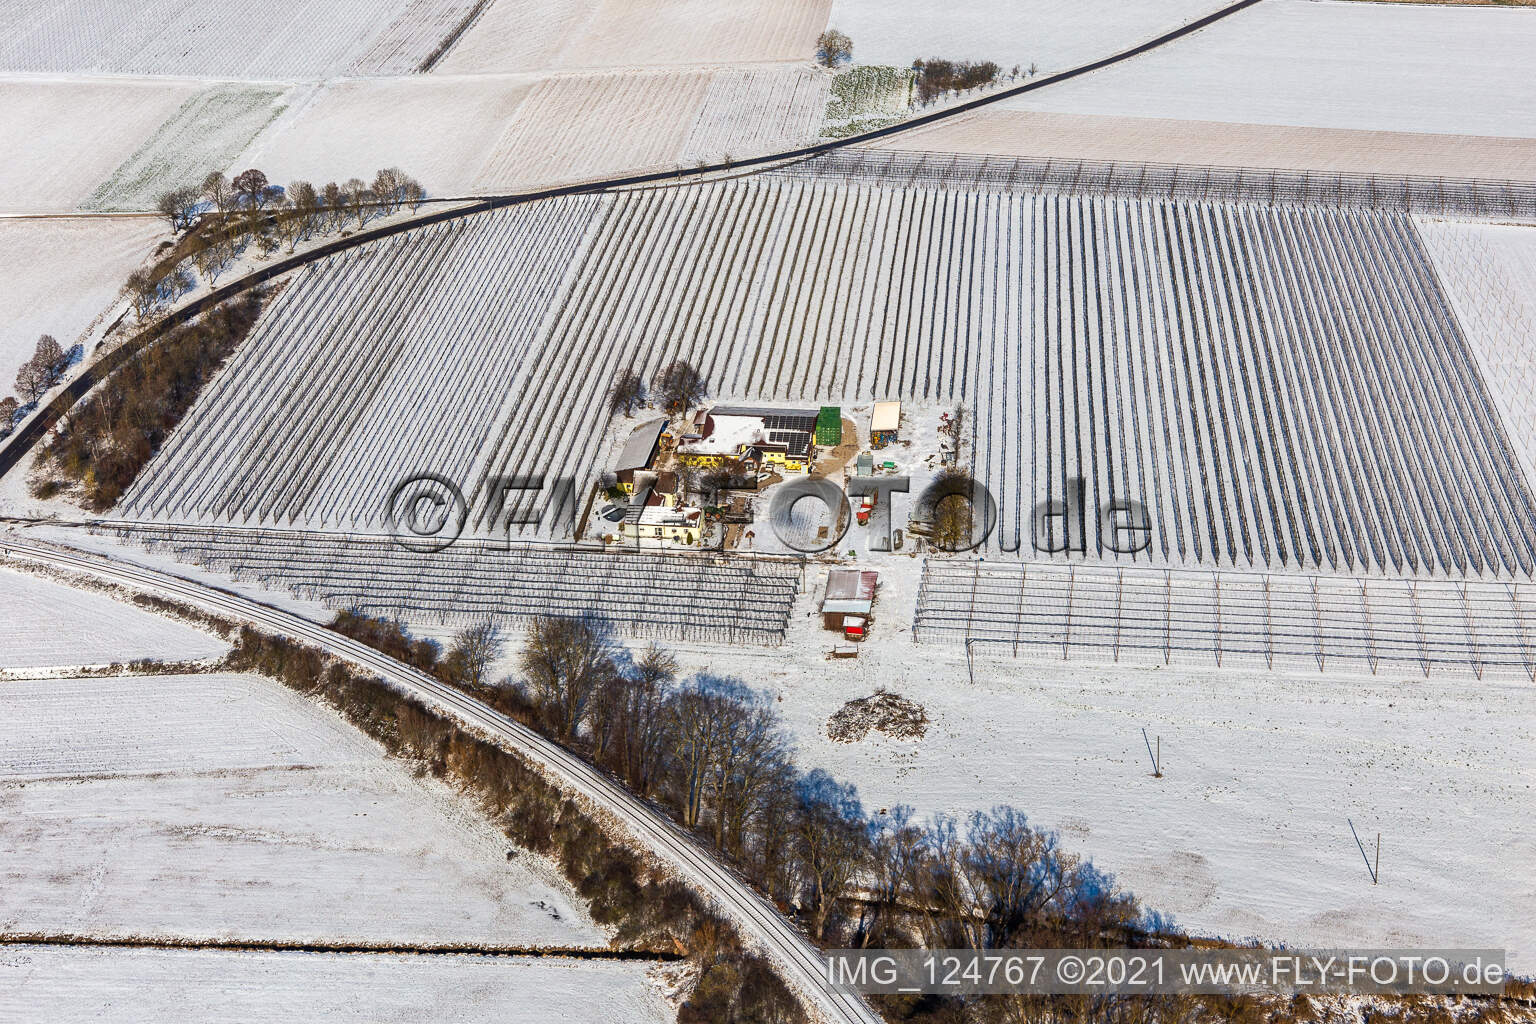 Aerial view of Winter aerial view in the snow of the Gensheimer asparagus and fruit farm in Steinweiler in the state Rhineland-Palatinate, Germany